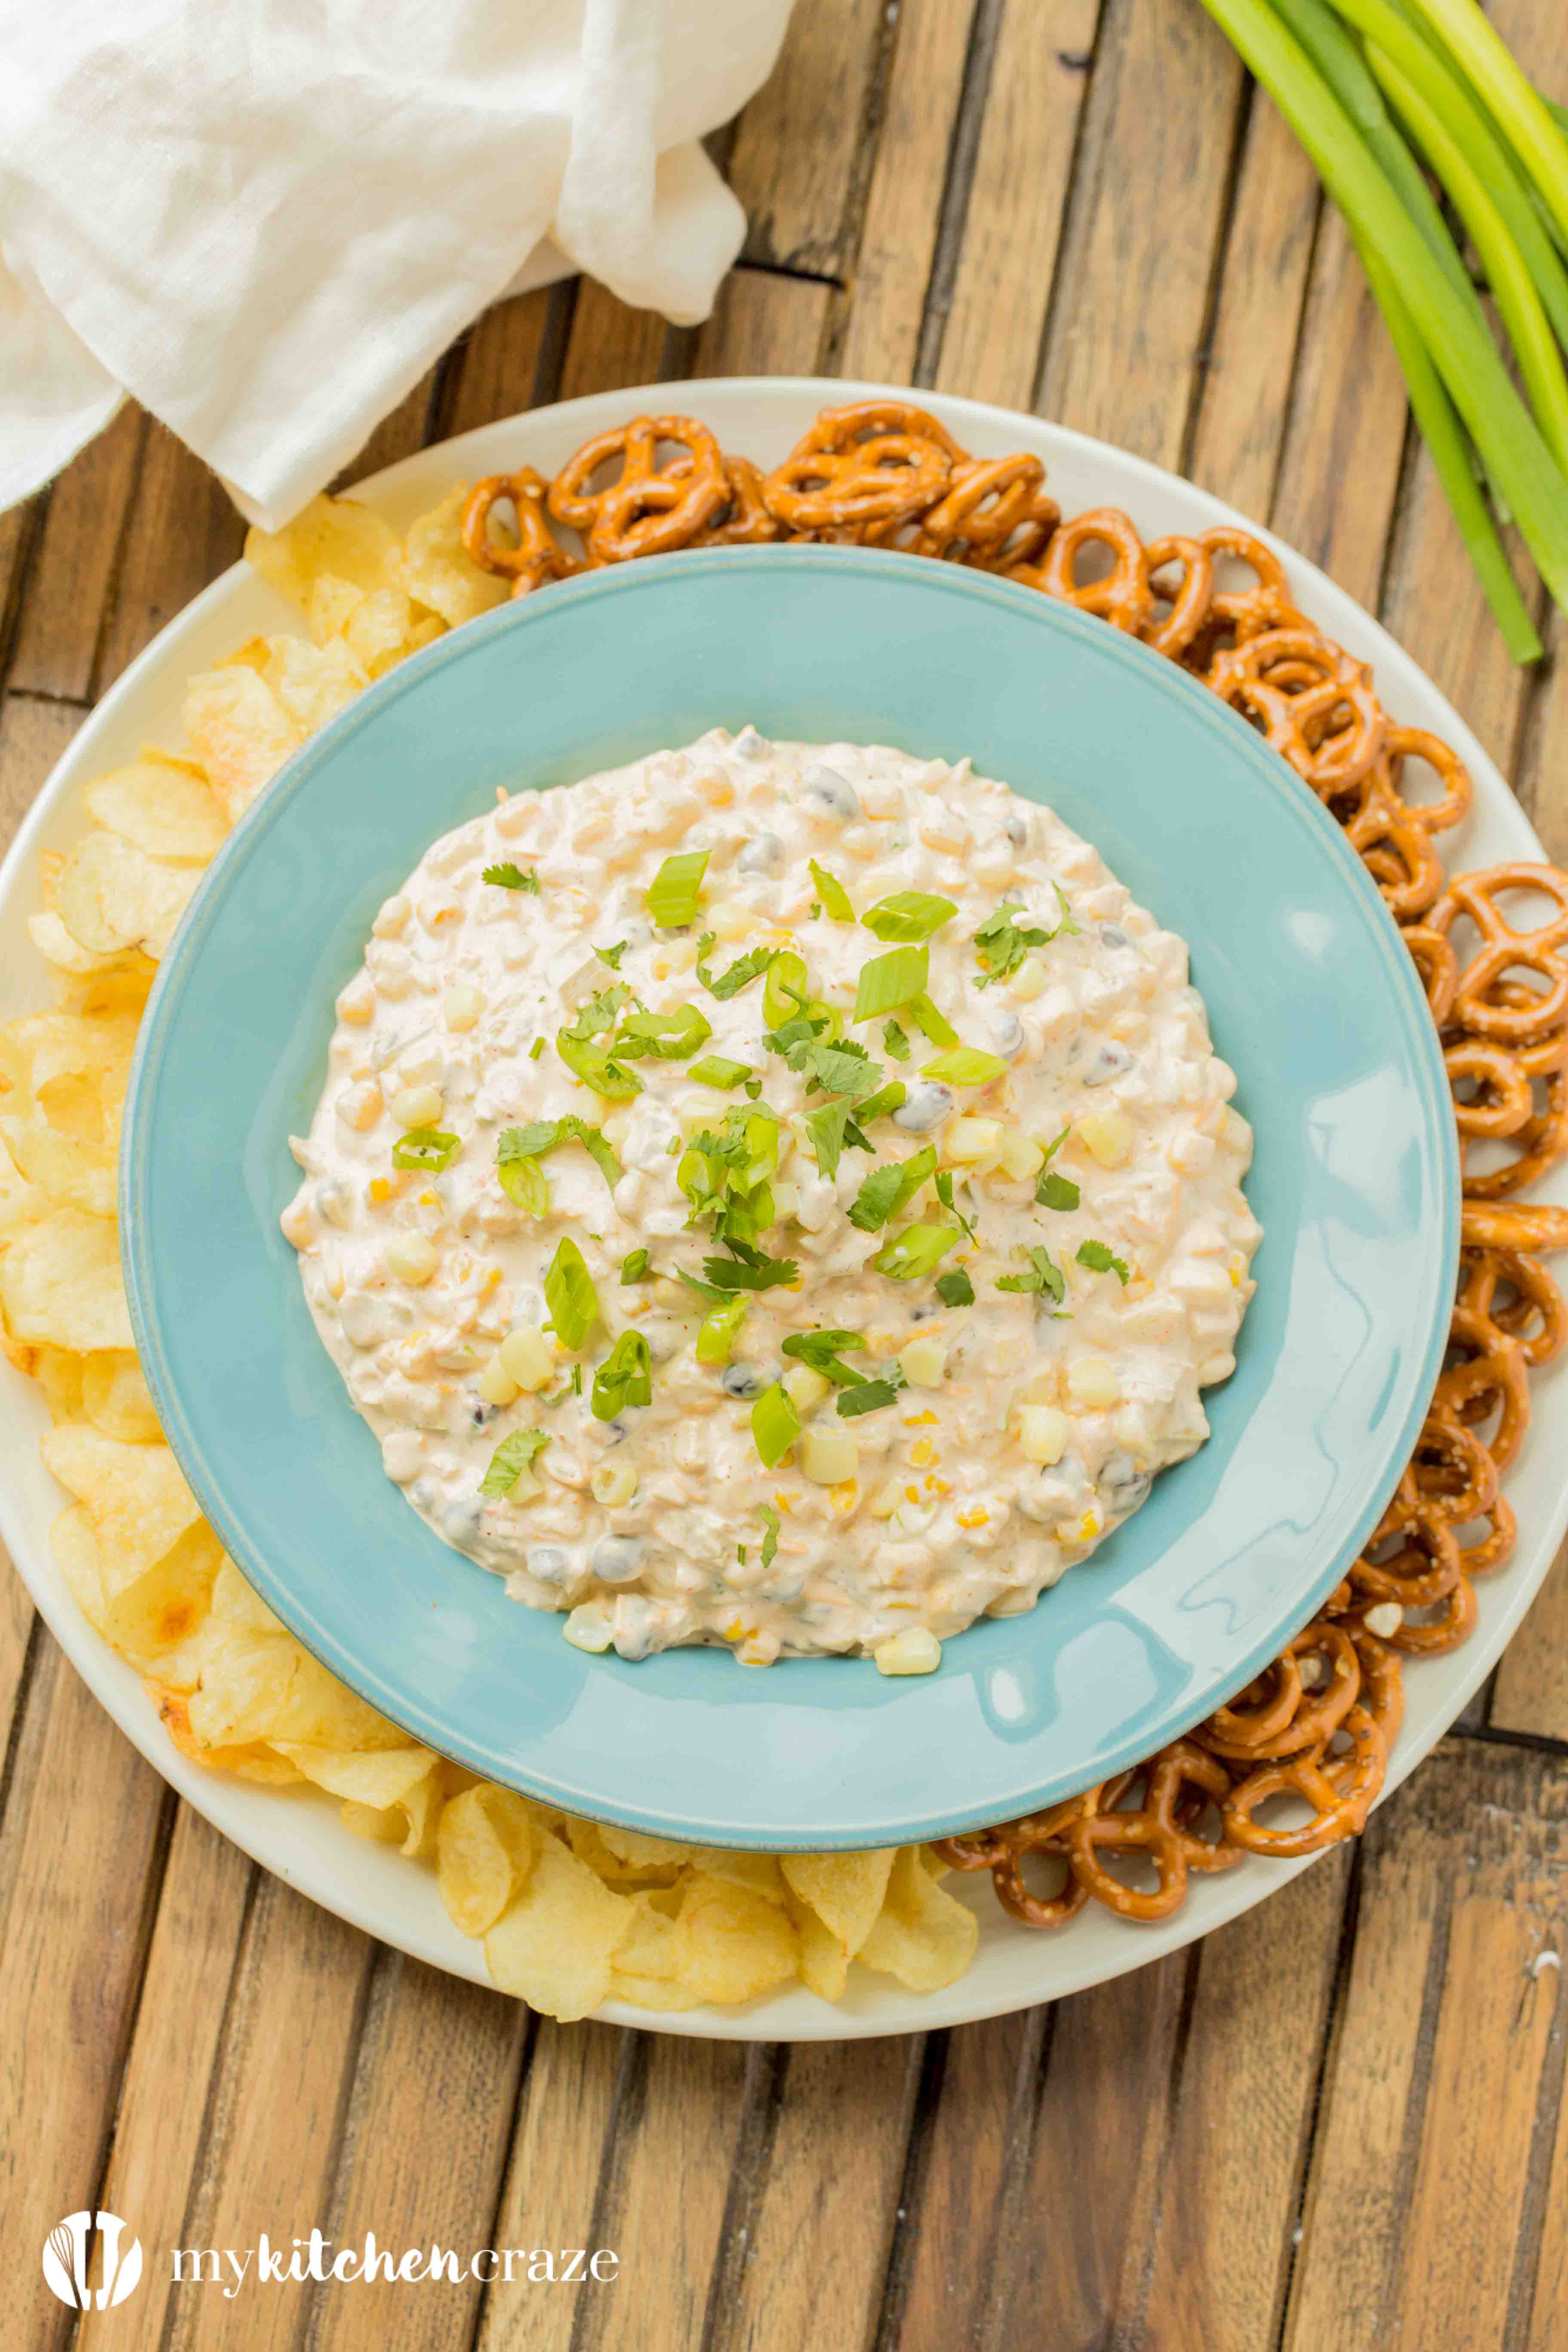 Spicy Corn Dip ~ Loaded with all kinds of yummy ingredients, this dip is perfect for a fun party or family day! Everyone will love this dip!